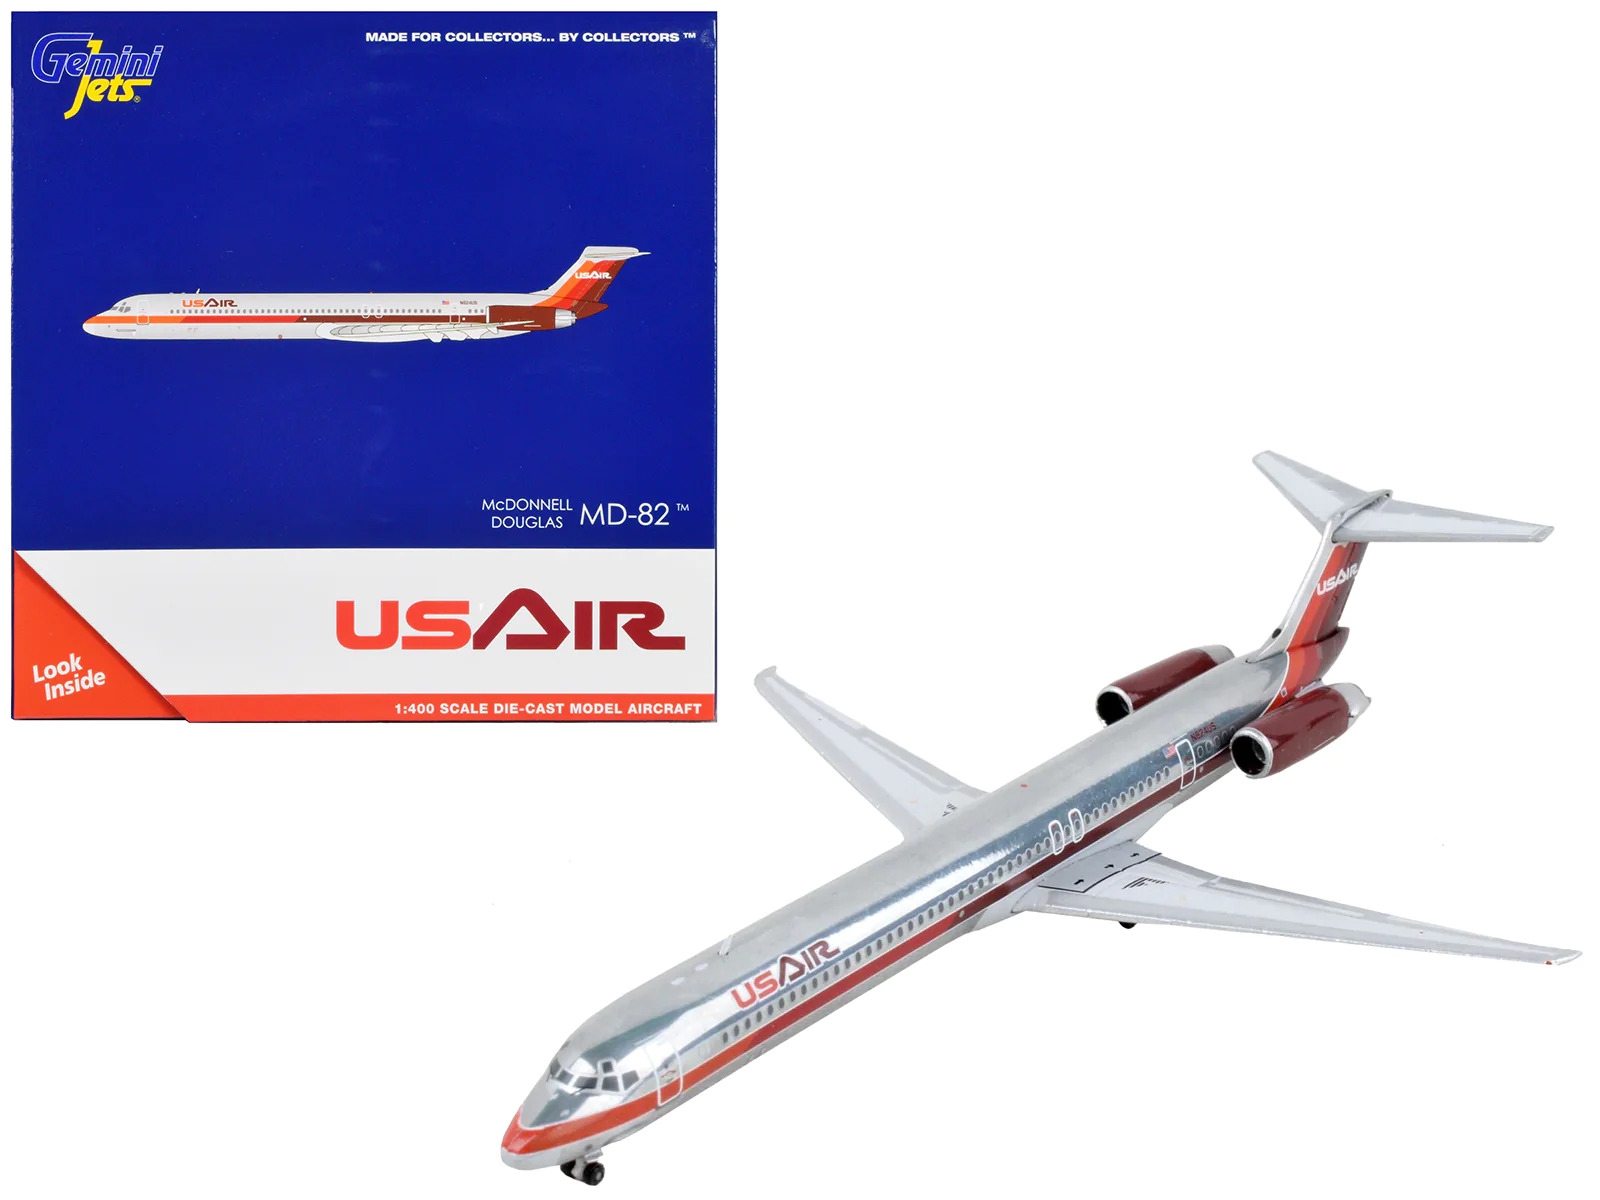 McDonnell Douglas MD-82 Commercial USAir Tail 1/400 Diecast Model Airplane